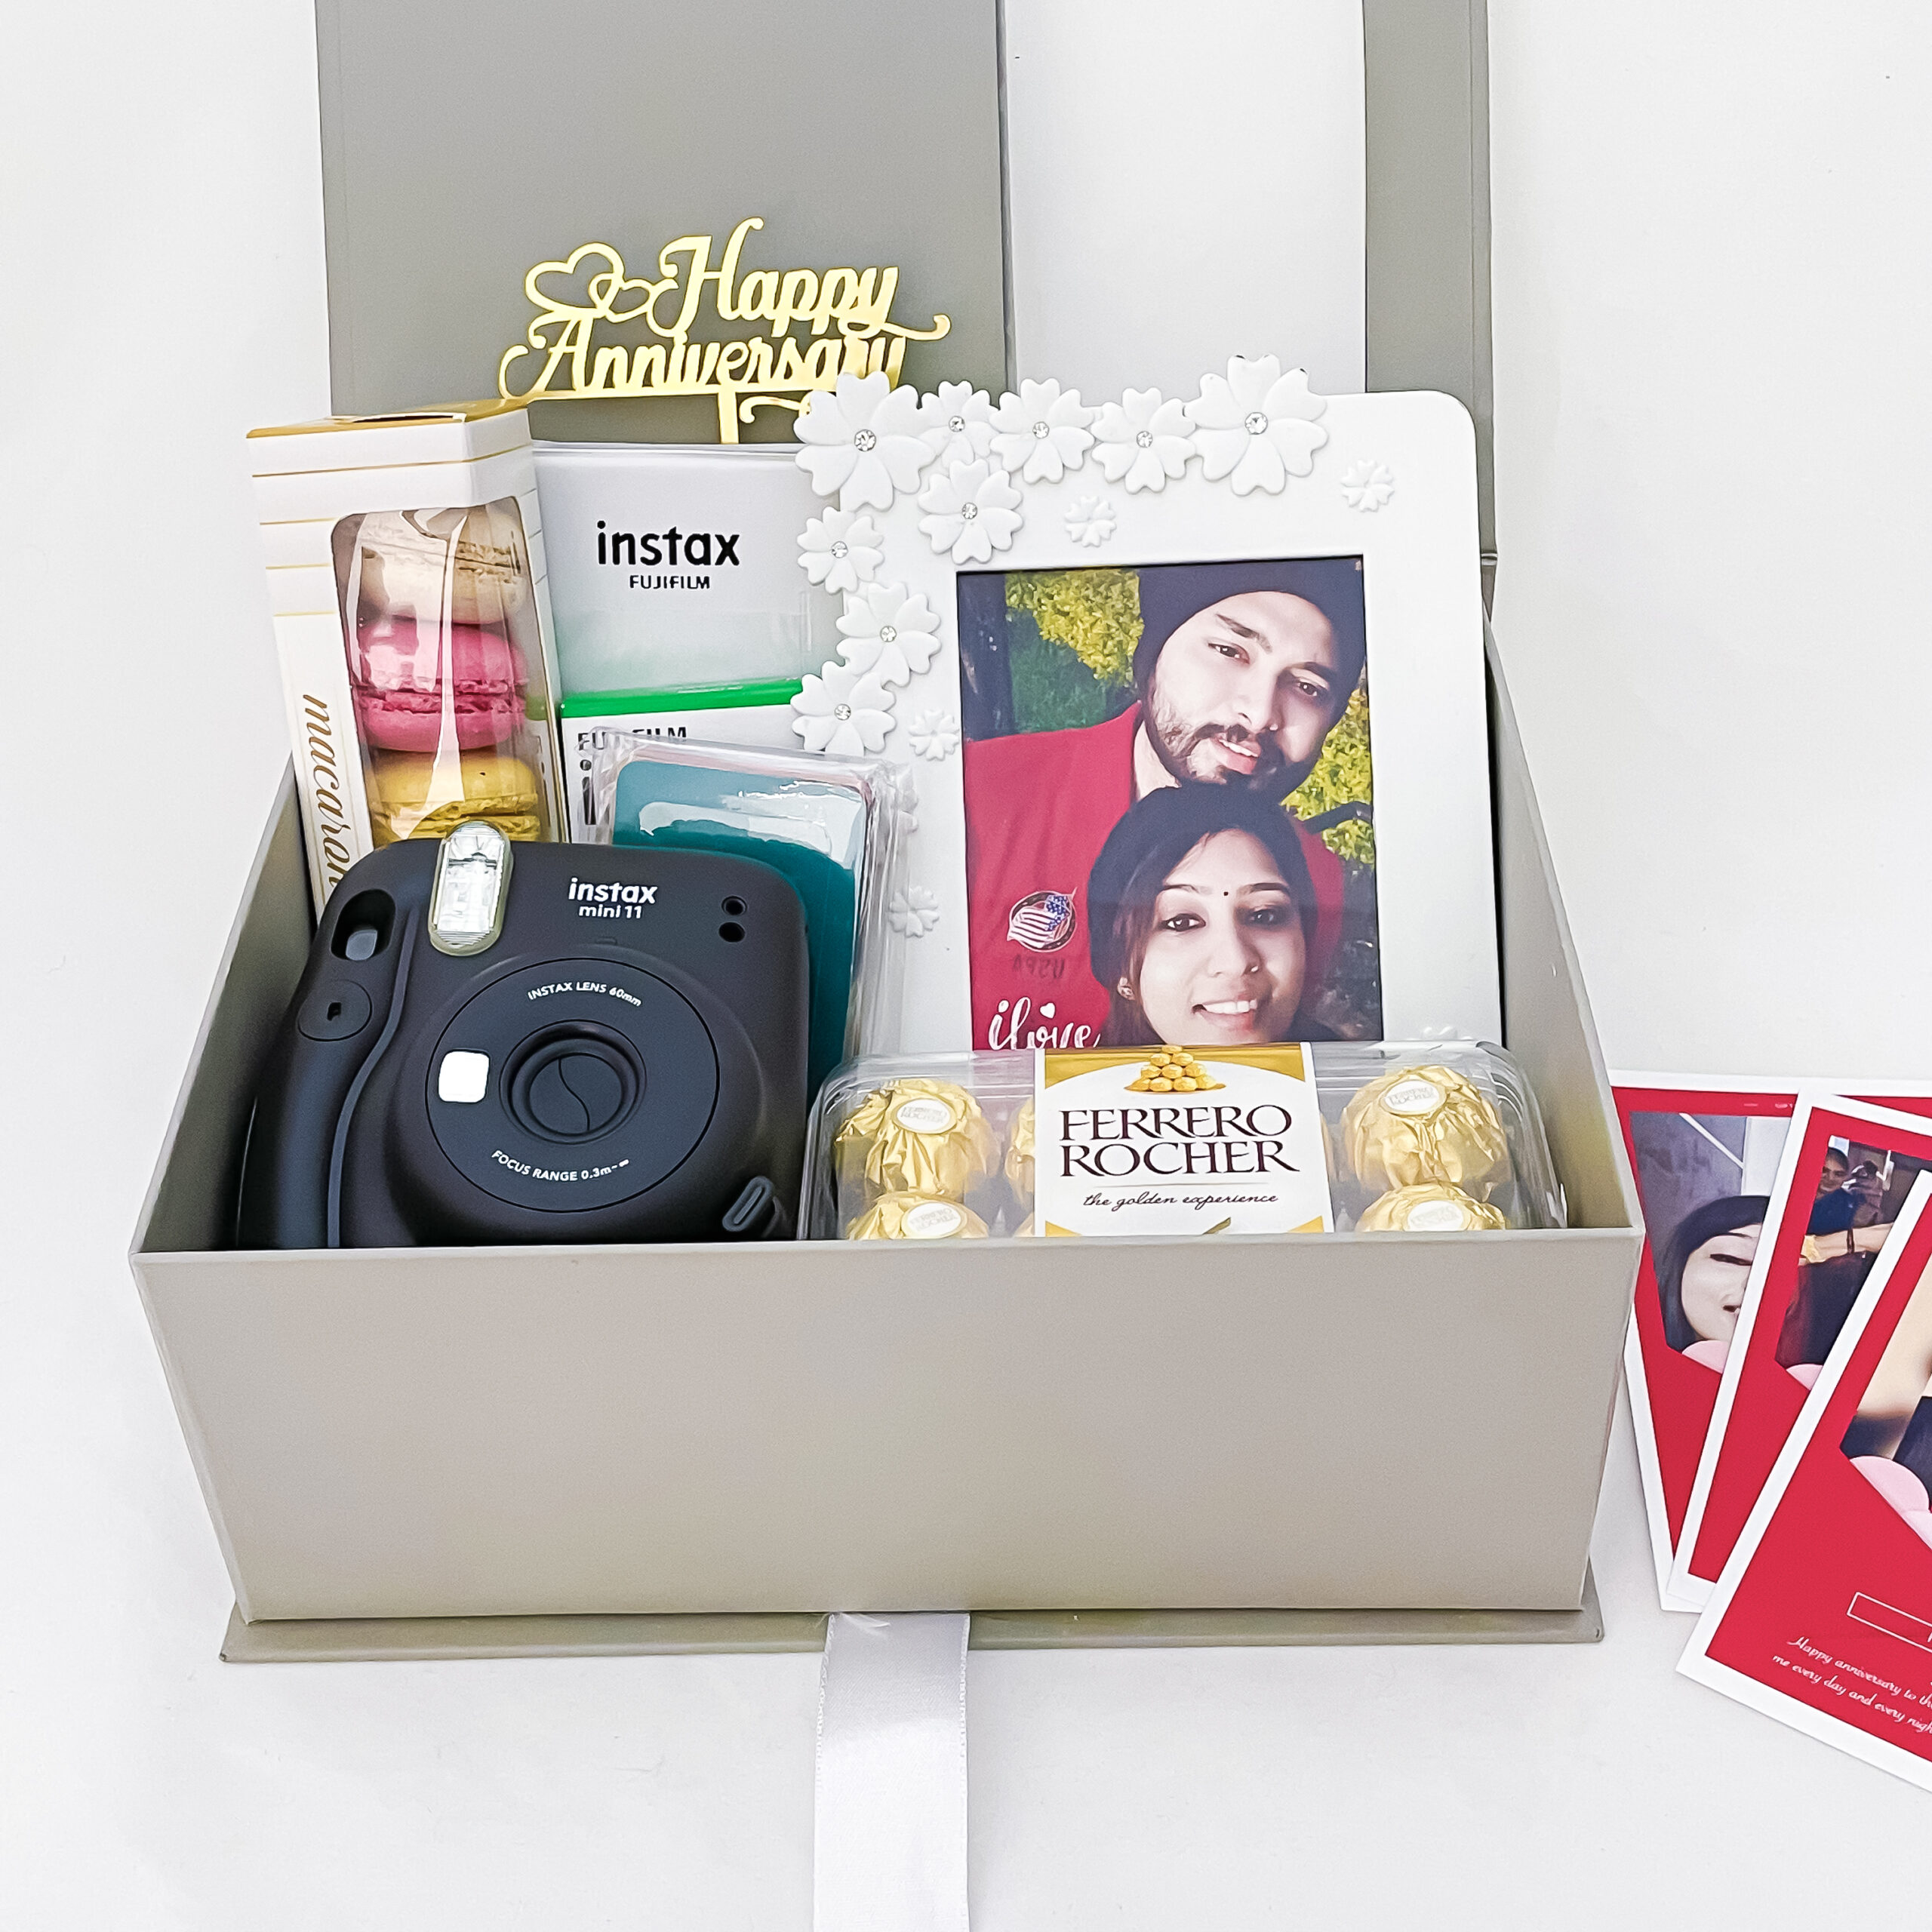 25th Anniversary Gift for couples - Silver Jubilee – Between Boxes Gifts